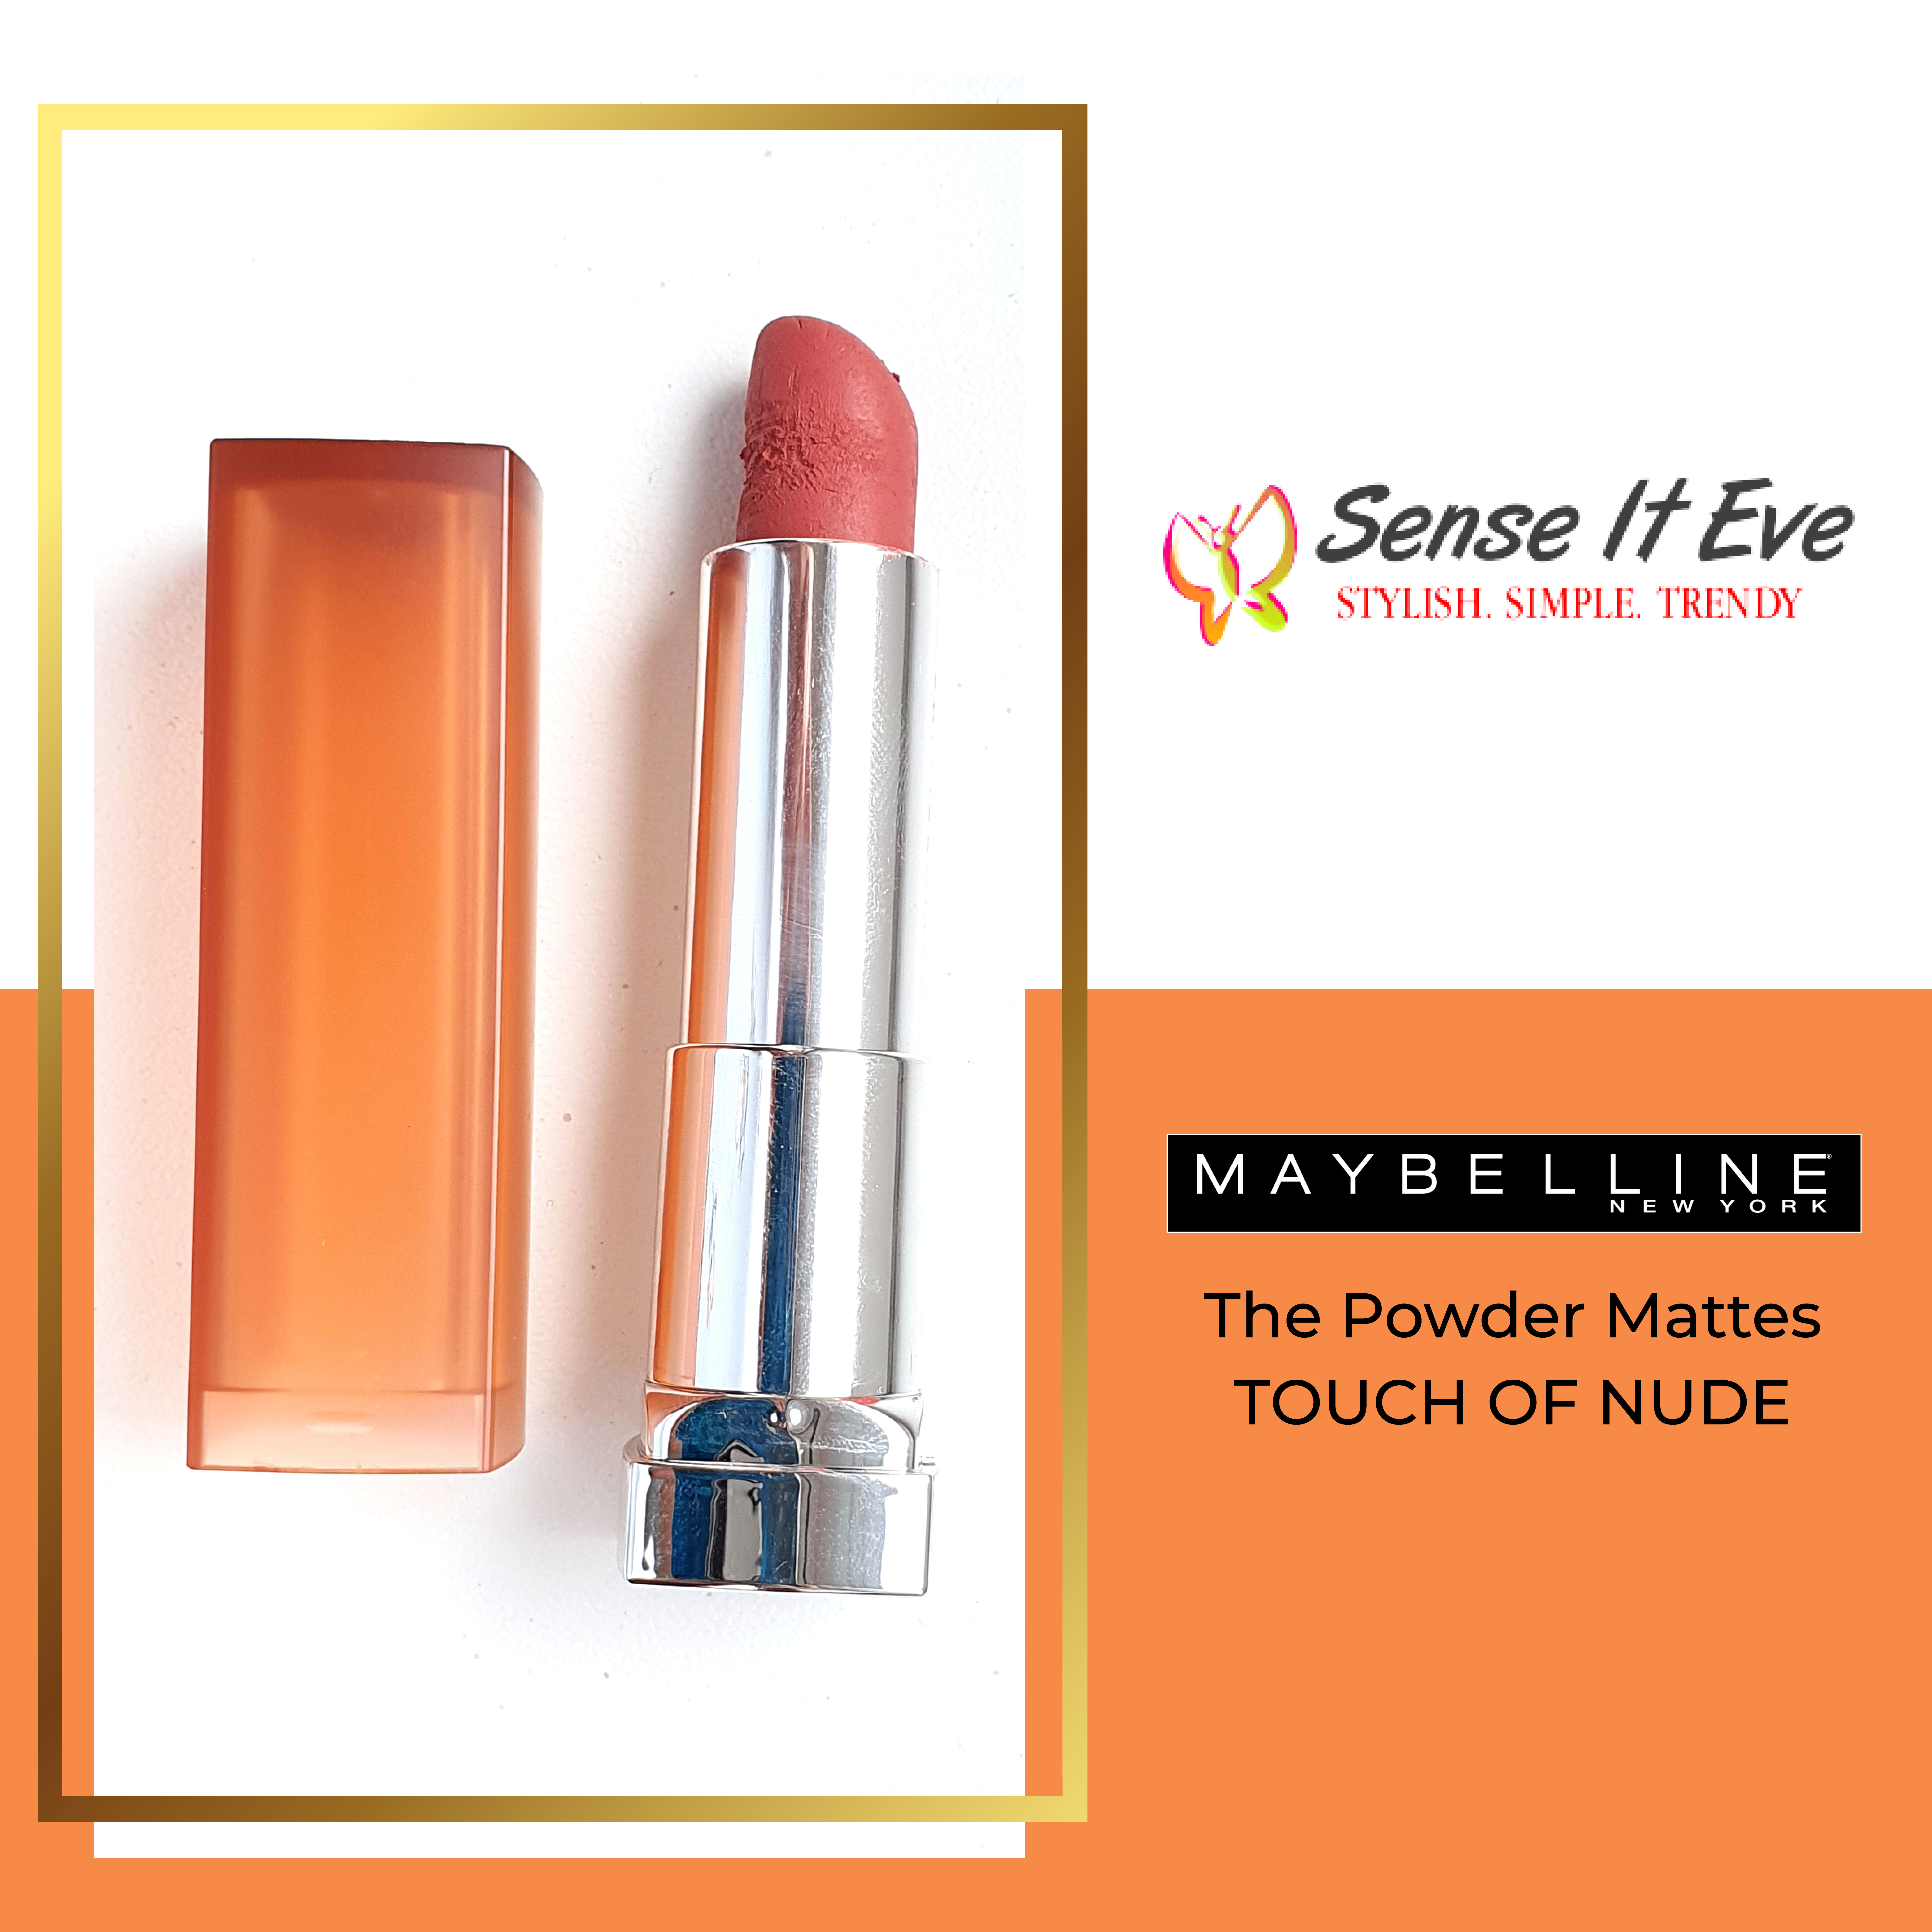 15 Dec 2 Sense It Eve Maybelline Powder Matte Lipstick Touch of Nude : Review & Swatches